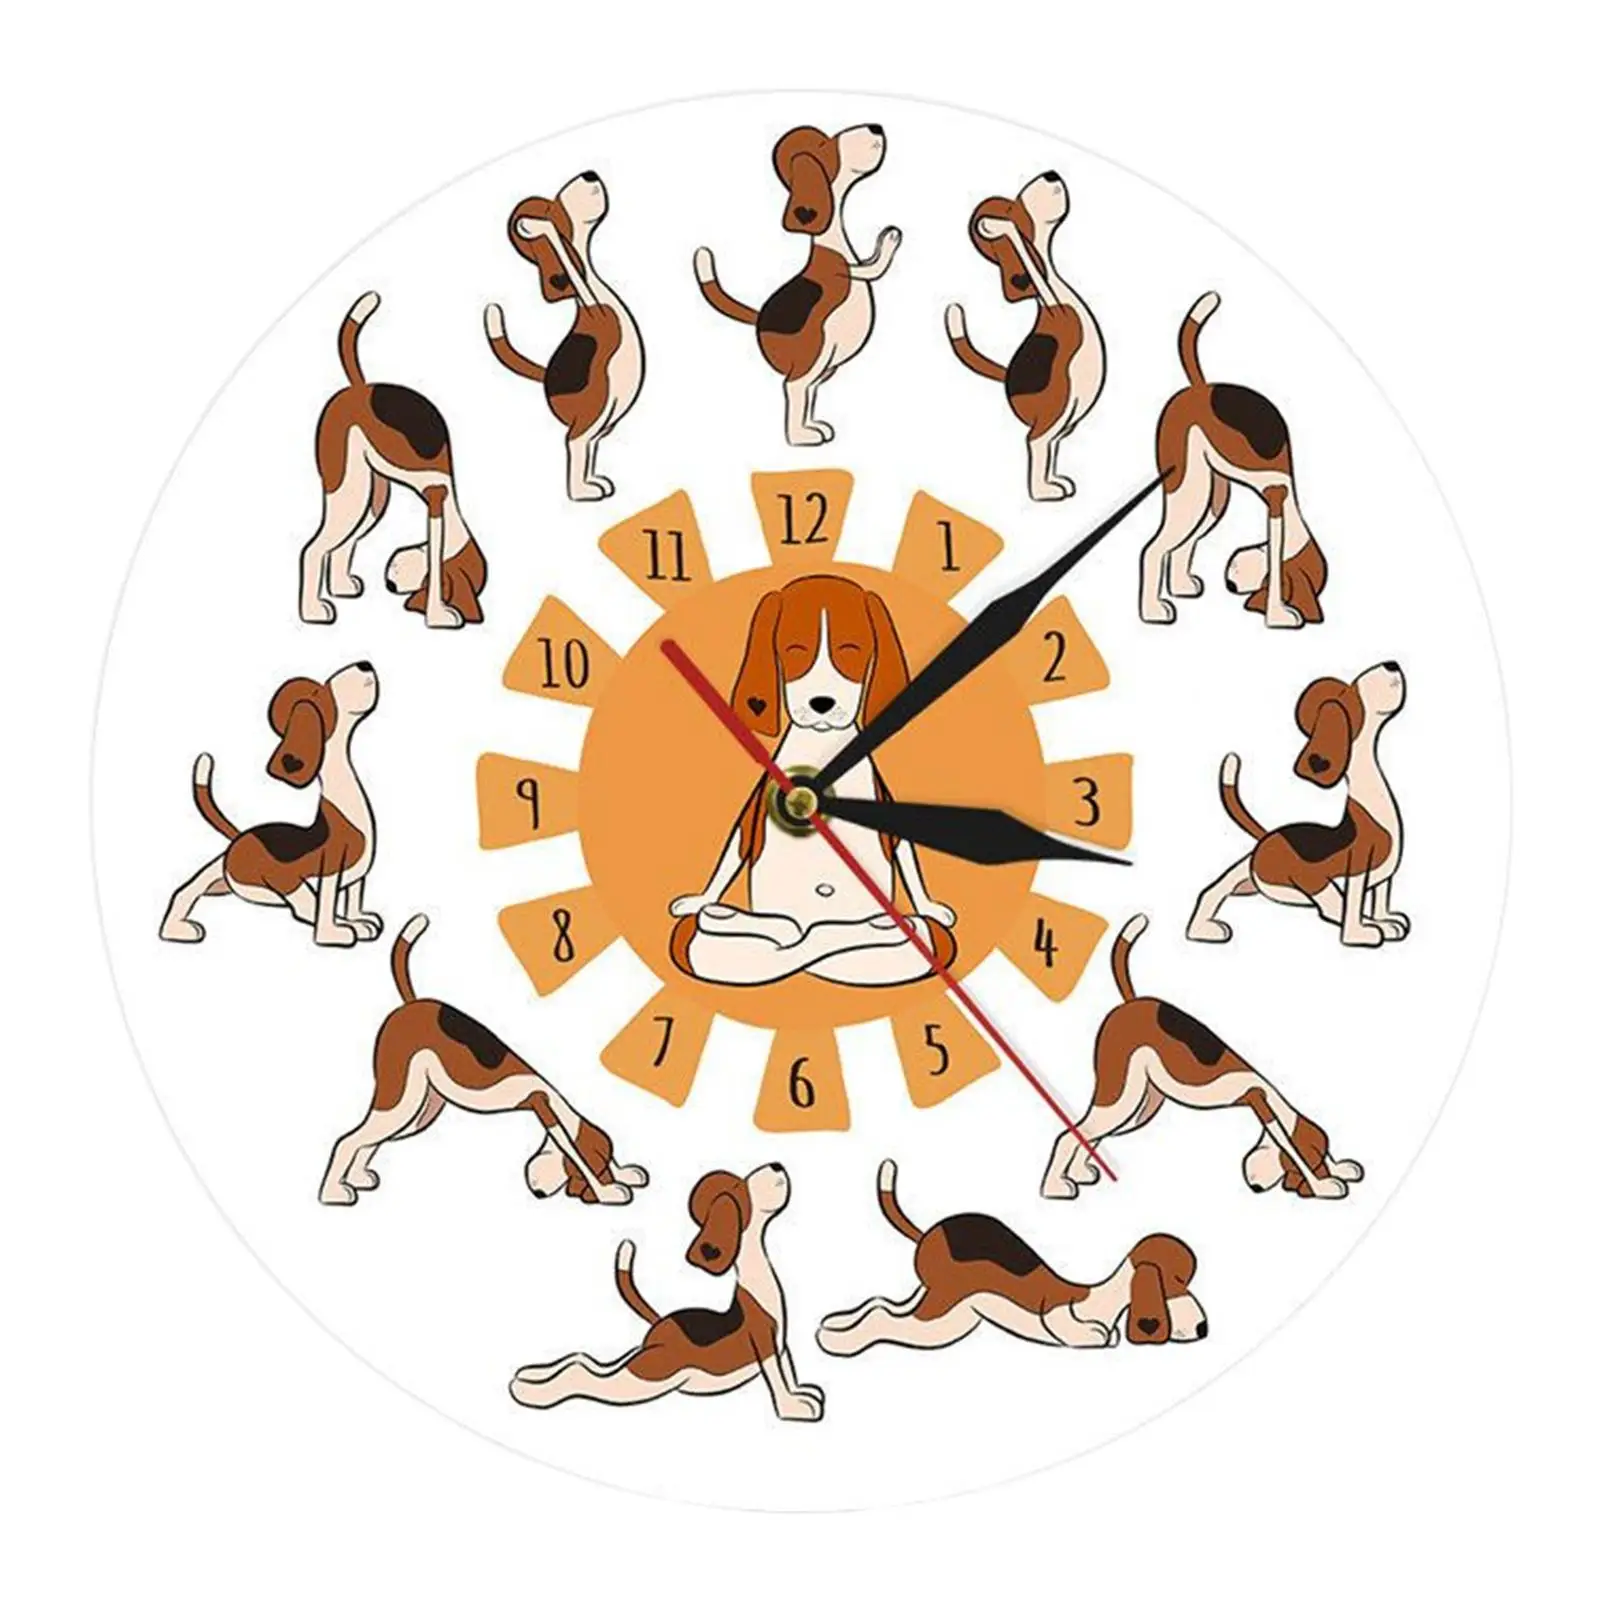 Round Dog Doing Yoga Position Wall Clocks 12 inch Light Weight for Living Room, Bedroom, Study Room, Laundry Room, Kitchen Large